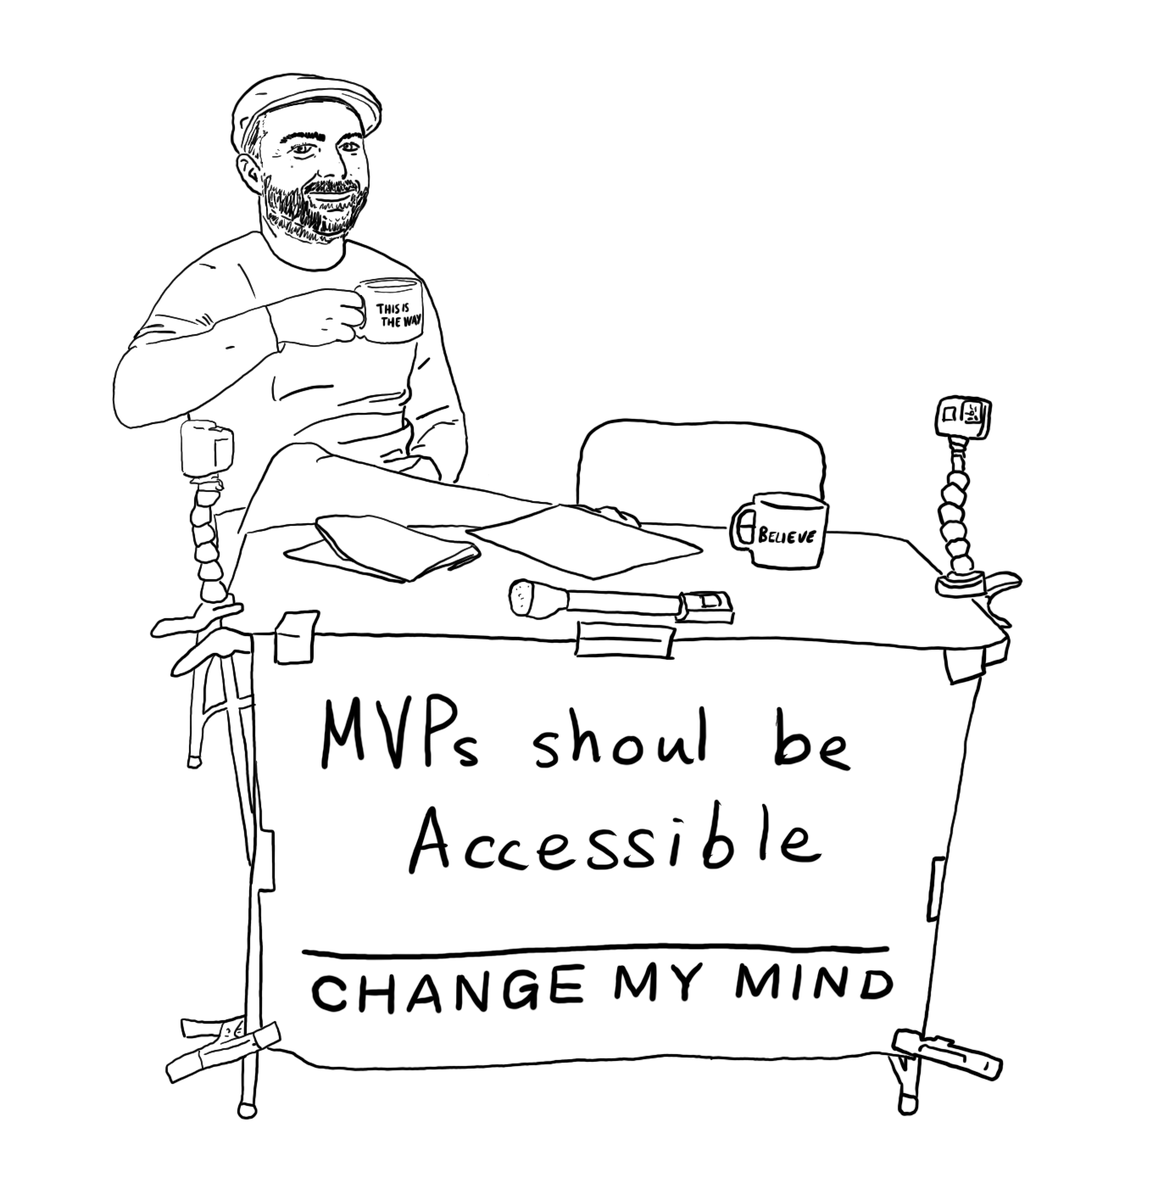 Yeah, MVPs should be accessible. Change my mind.
#accessibility #a11y